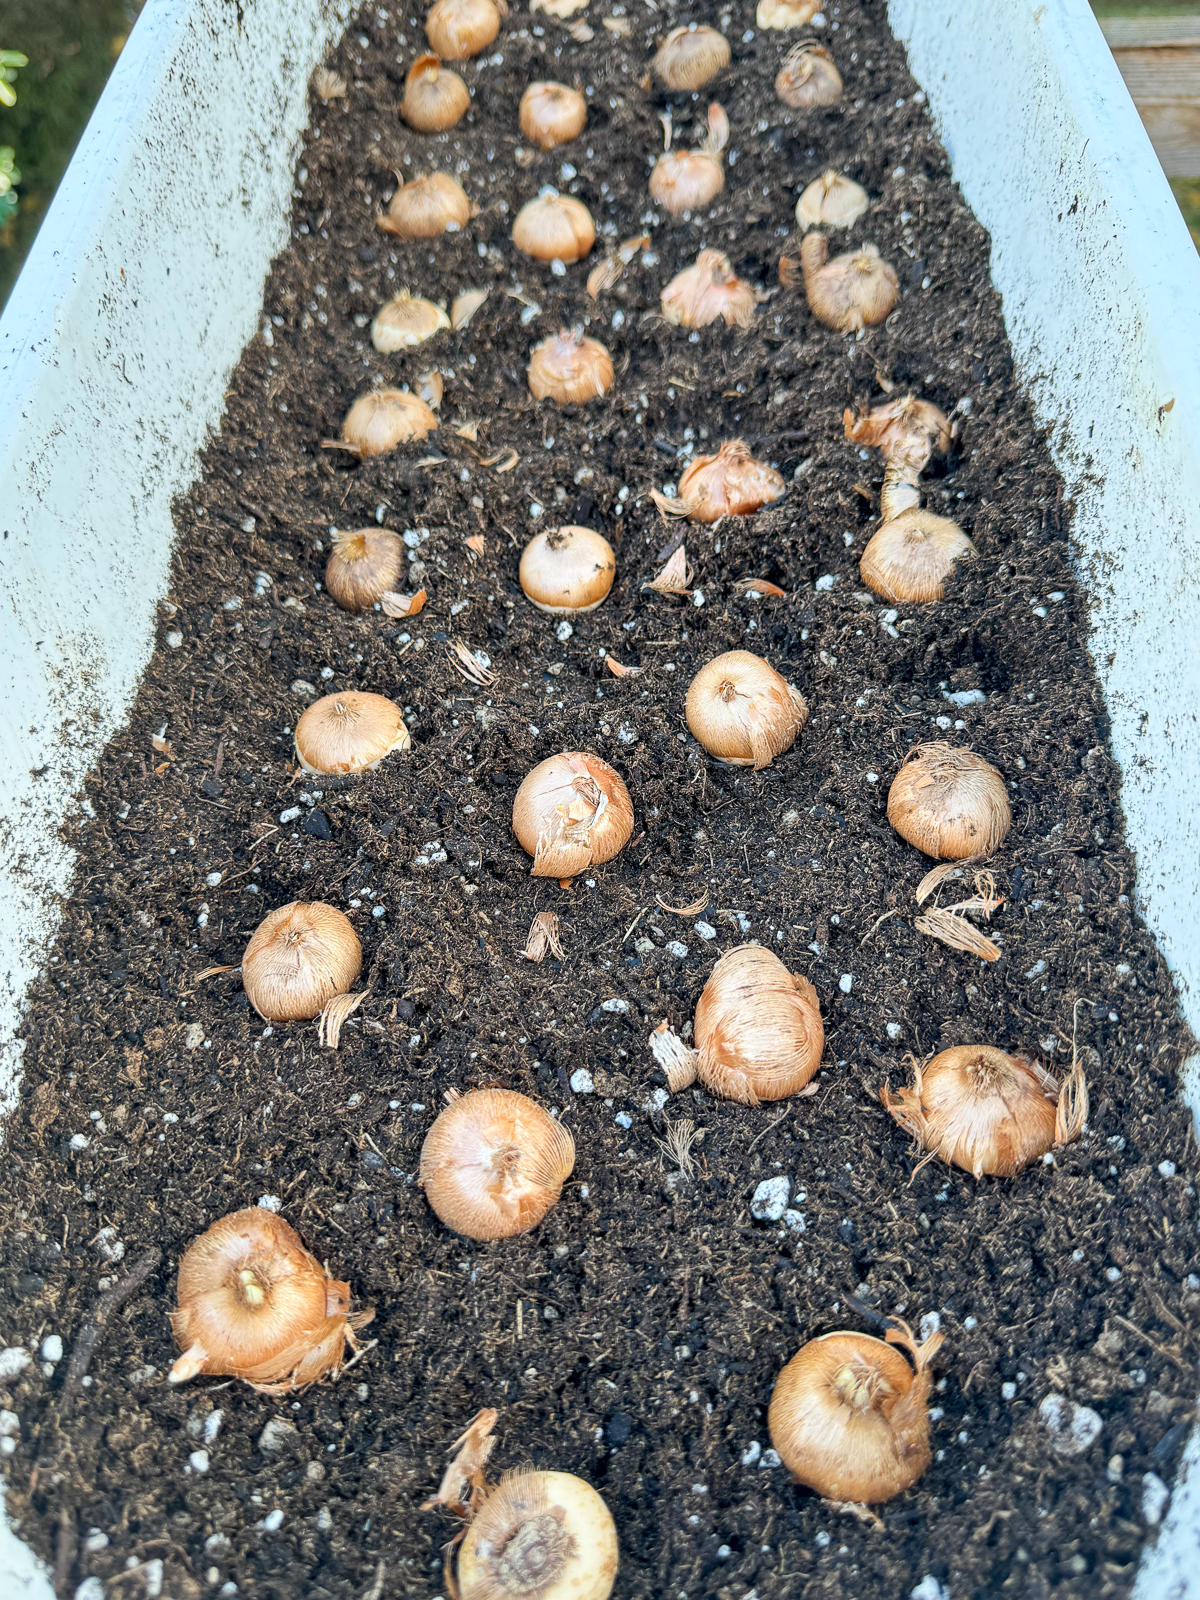 planting crocus bulbs in a pot with about an inch of space between each one